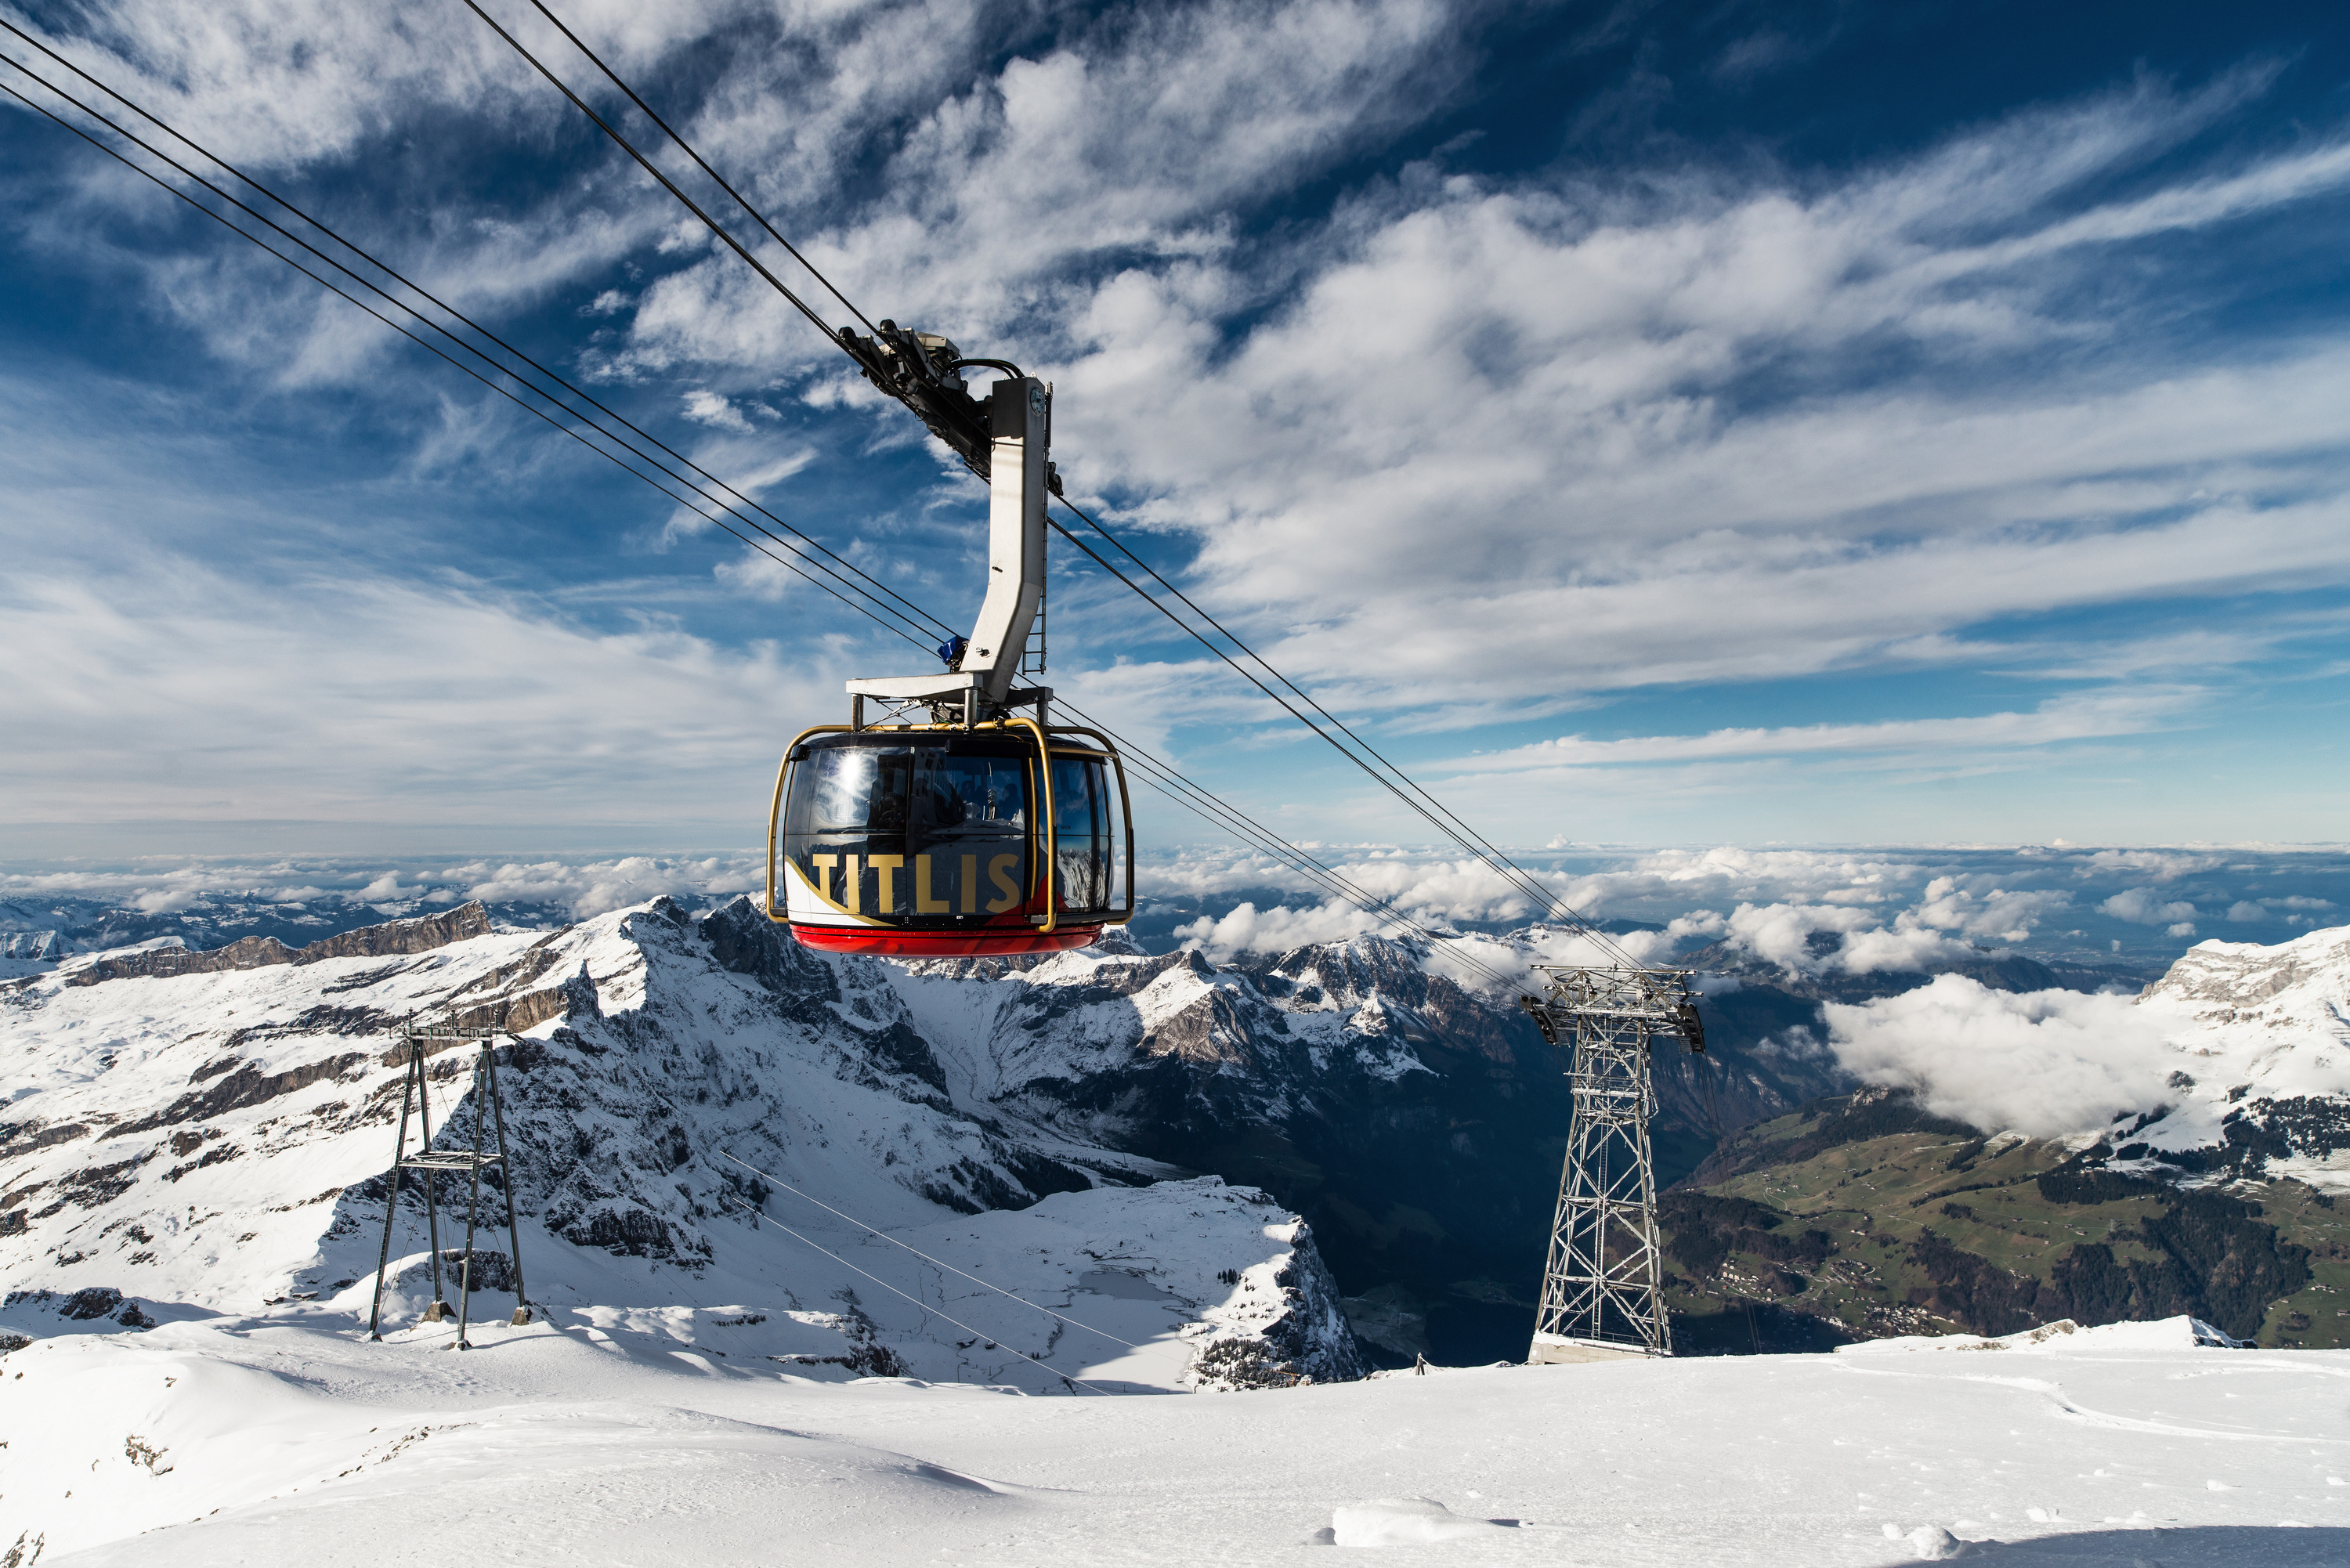 Switzerland’s incredible cable cars, gondolas and funiculars